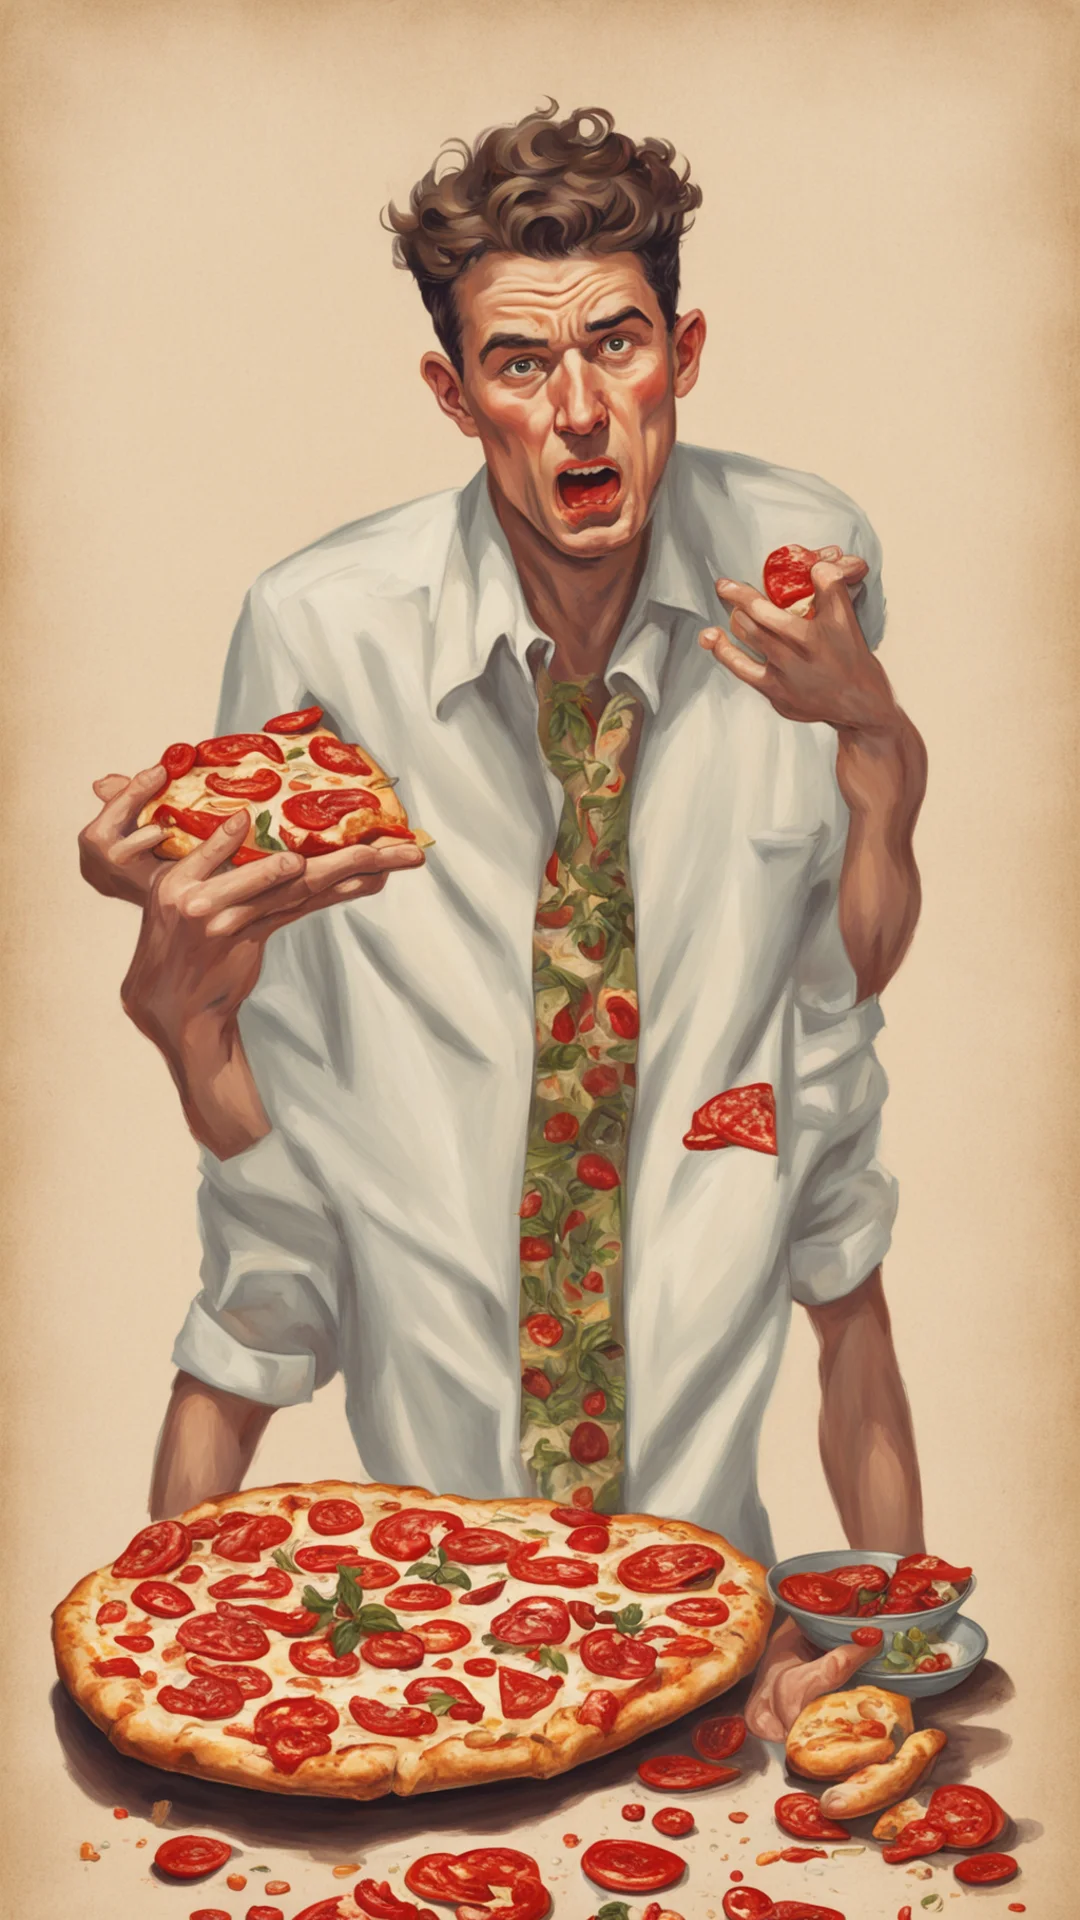 aiangry young man ravishing pizza in the style of norman rockwell amazing awesome portrait 2 tall